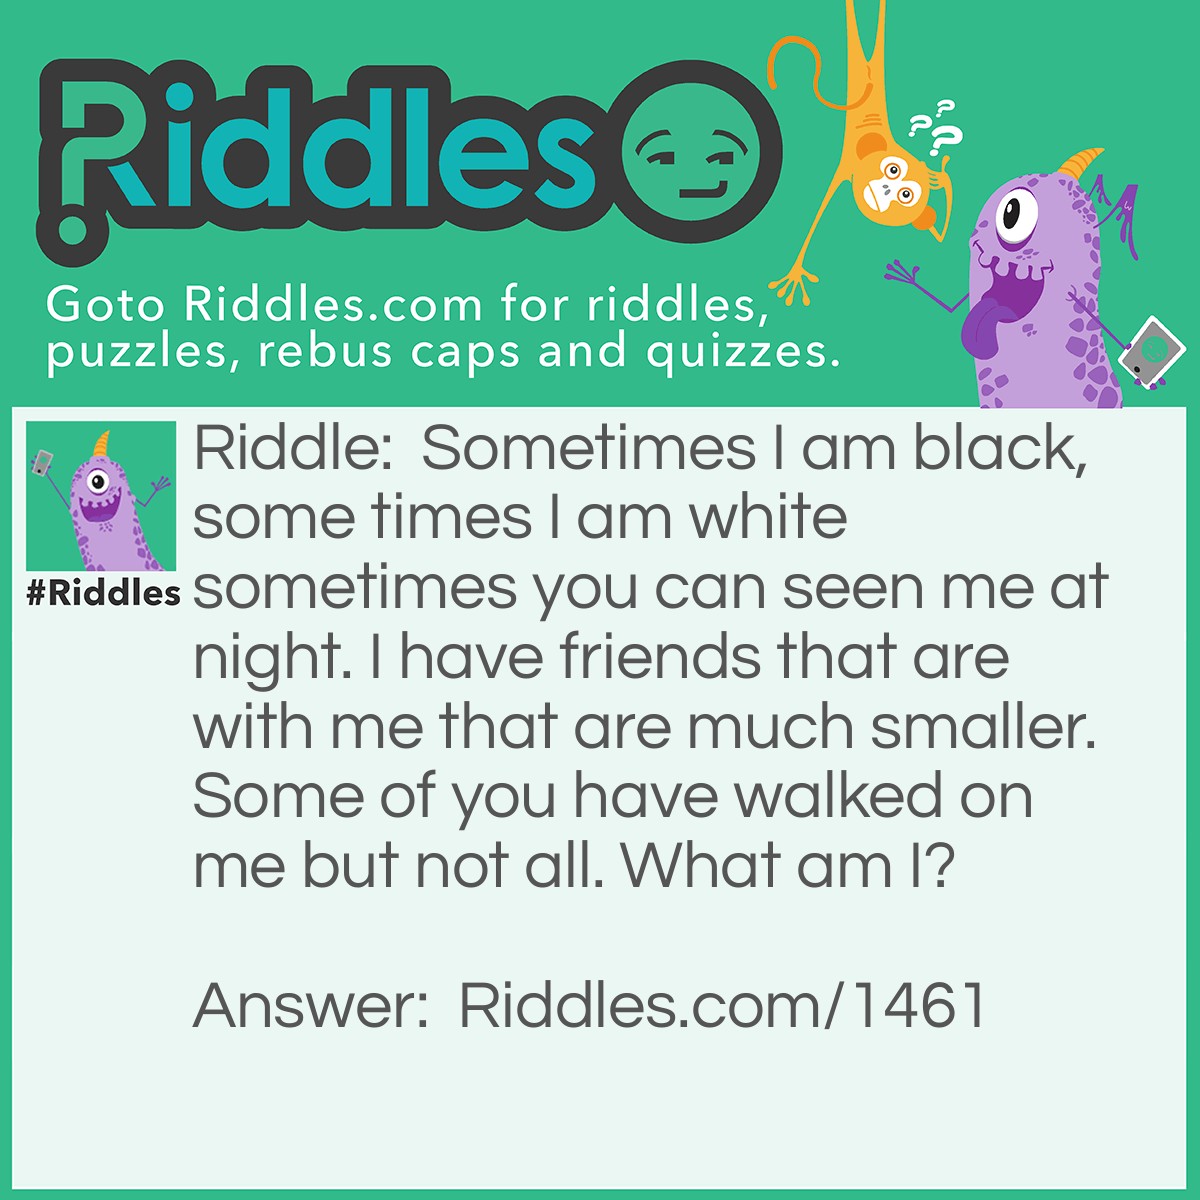 Riddle: Sometimes I am black, sometimes I am white sometimes you can see me at night. I have friends that are with me that are much smaller. Some of you have walked on me but not all. What am I? Answer: The Moon.